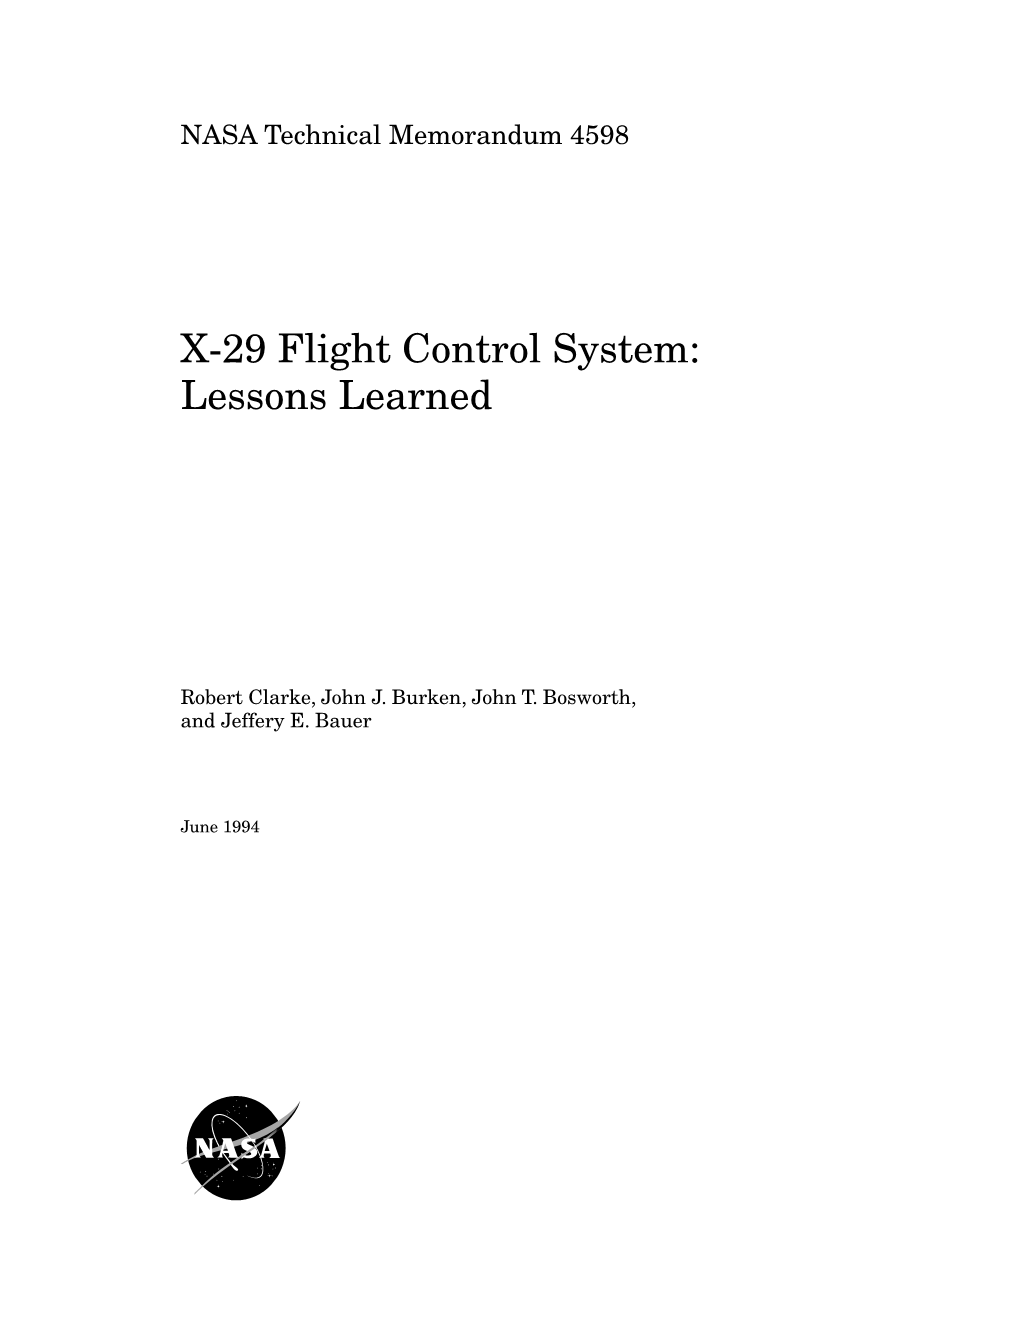 X-29 Flight Control System: Lessons Learned